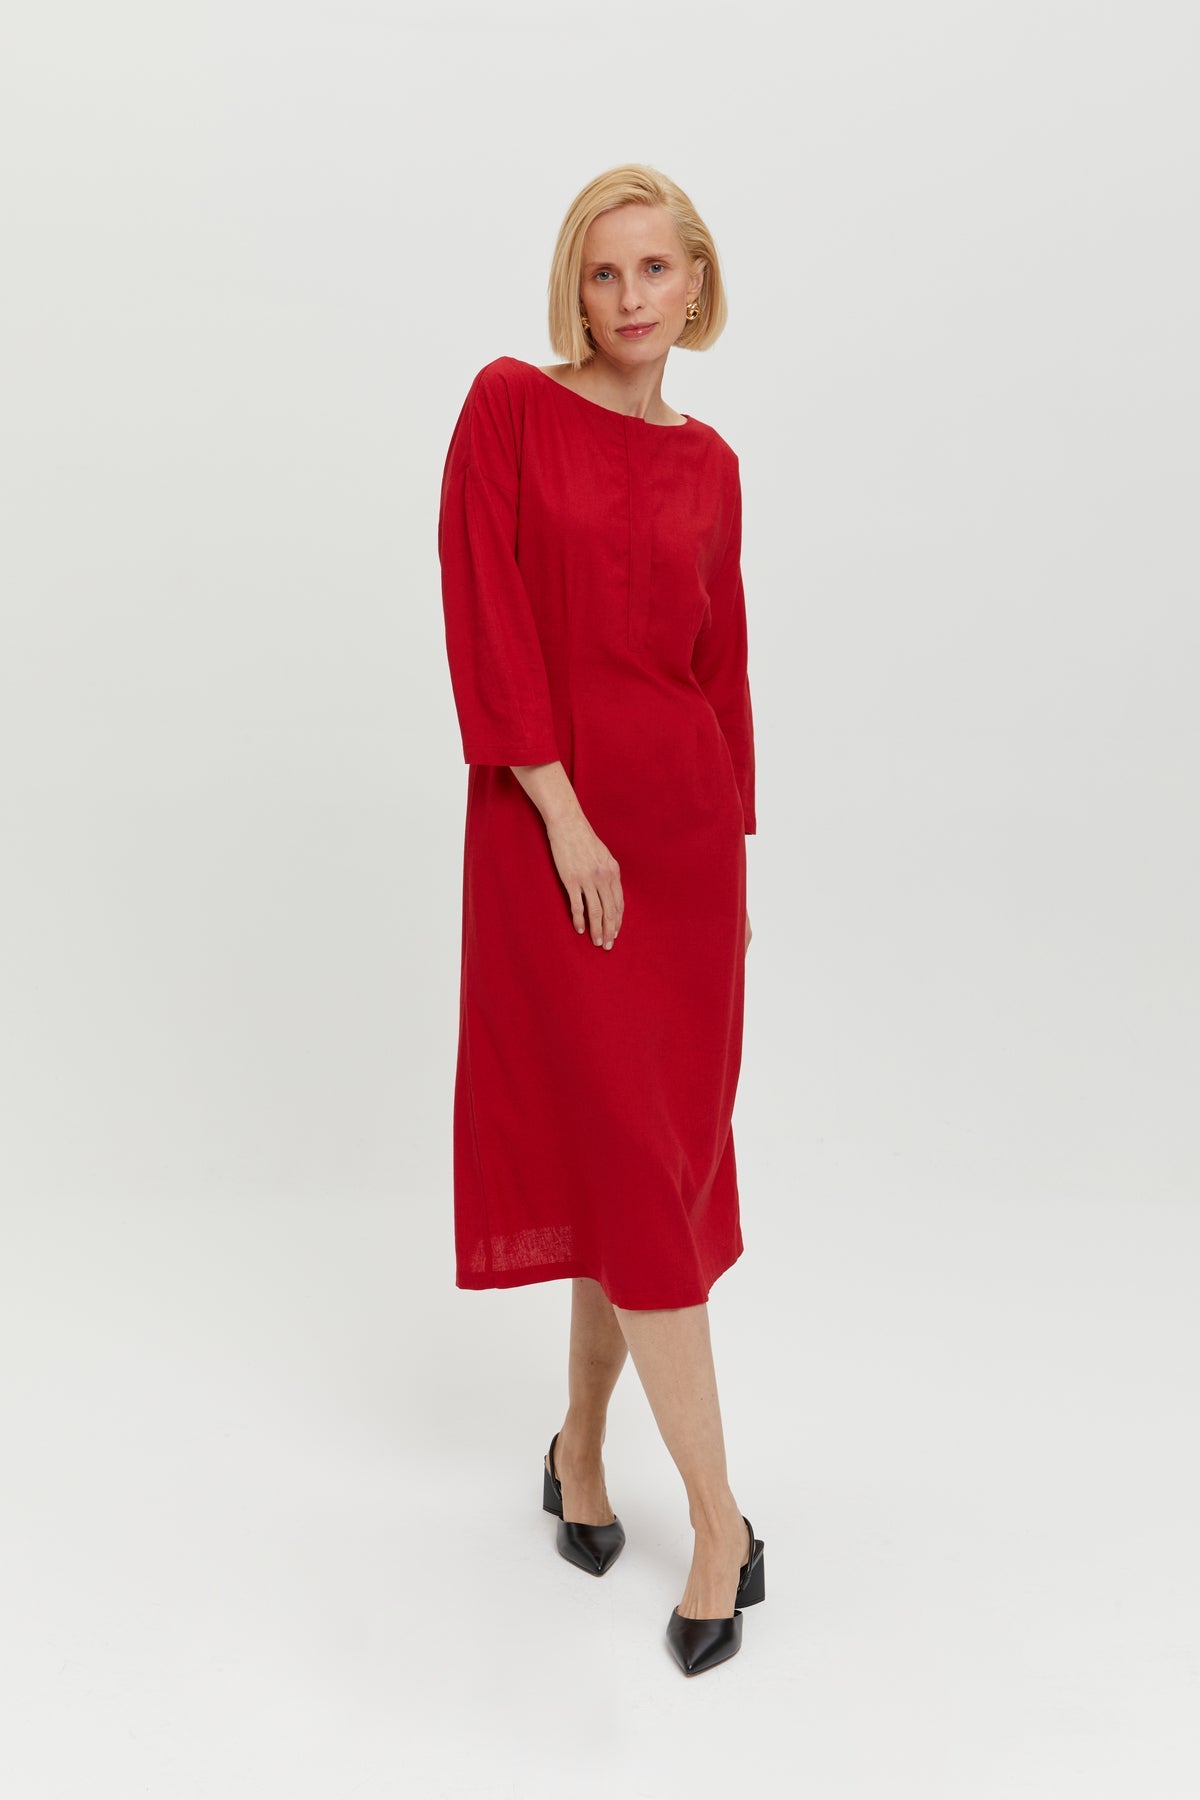 Lusin | Linen button front midi dress in red by Ayani